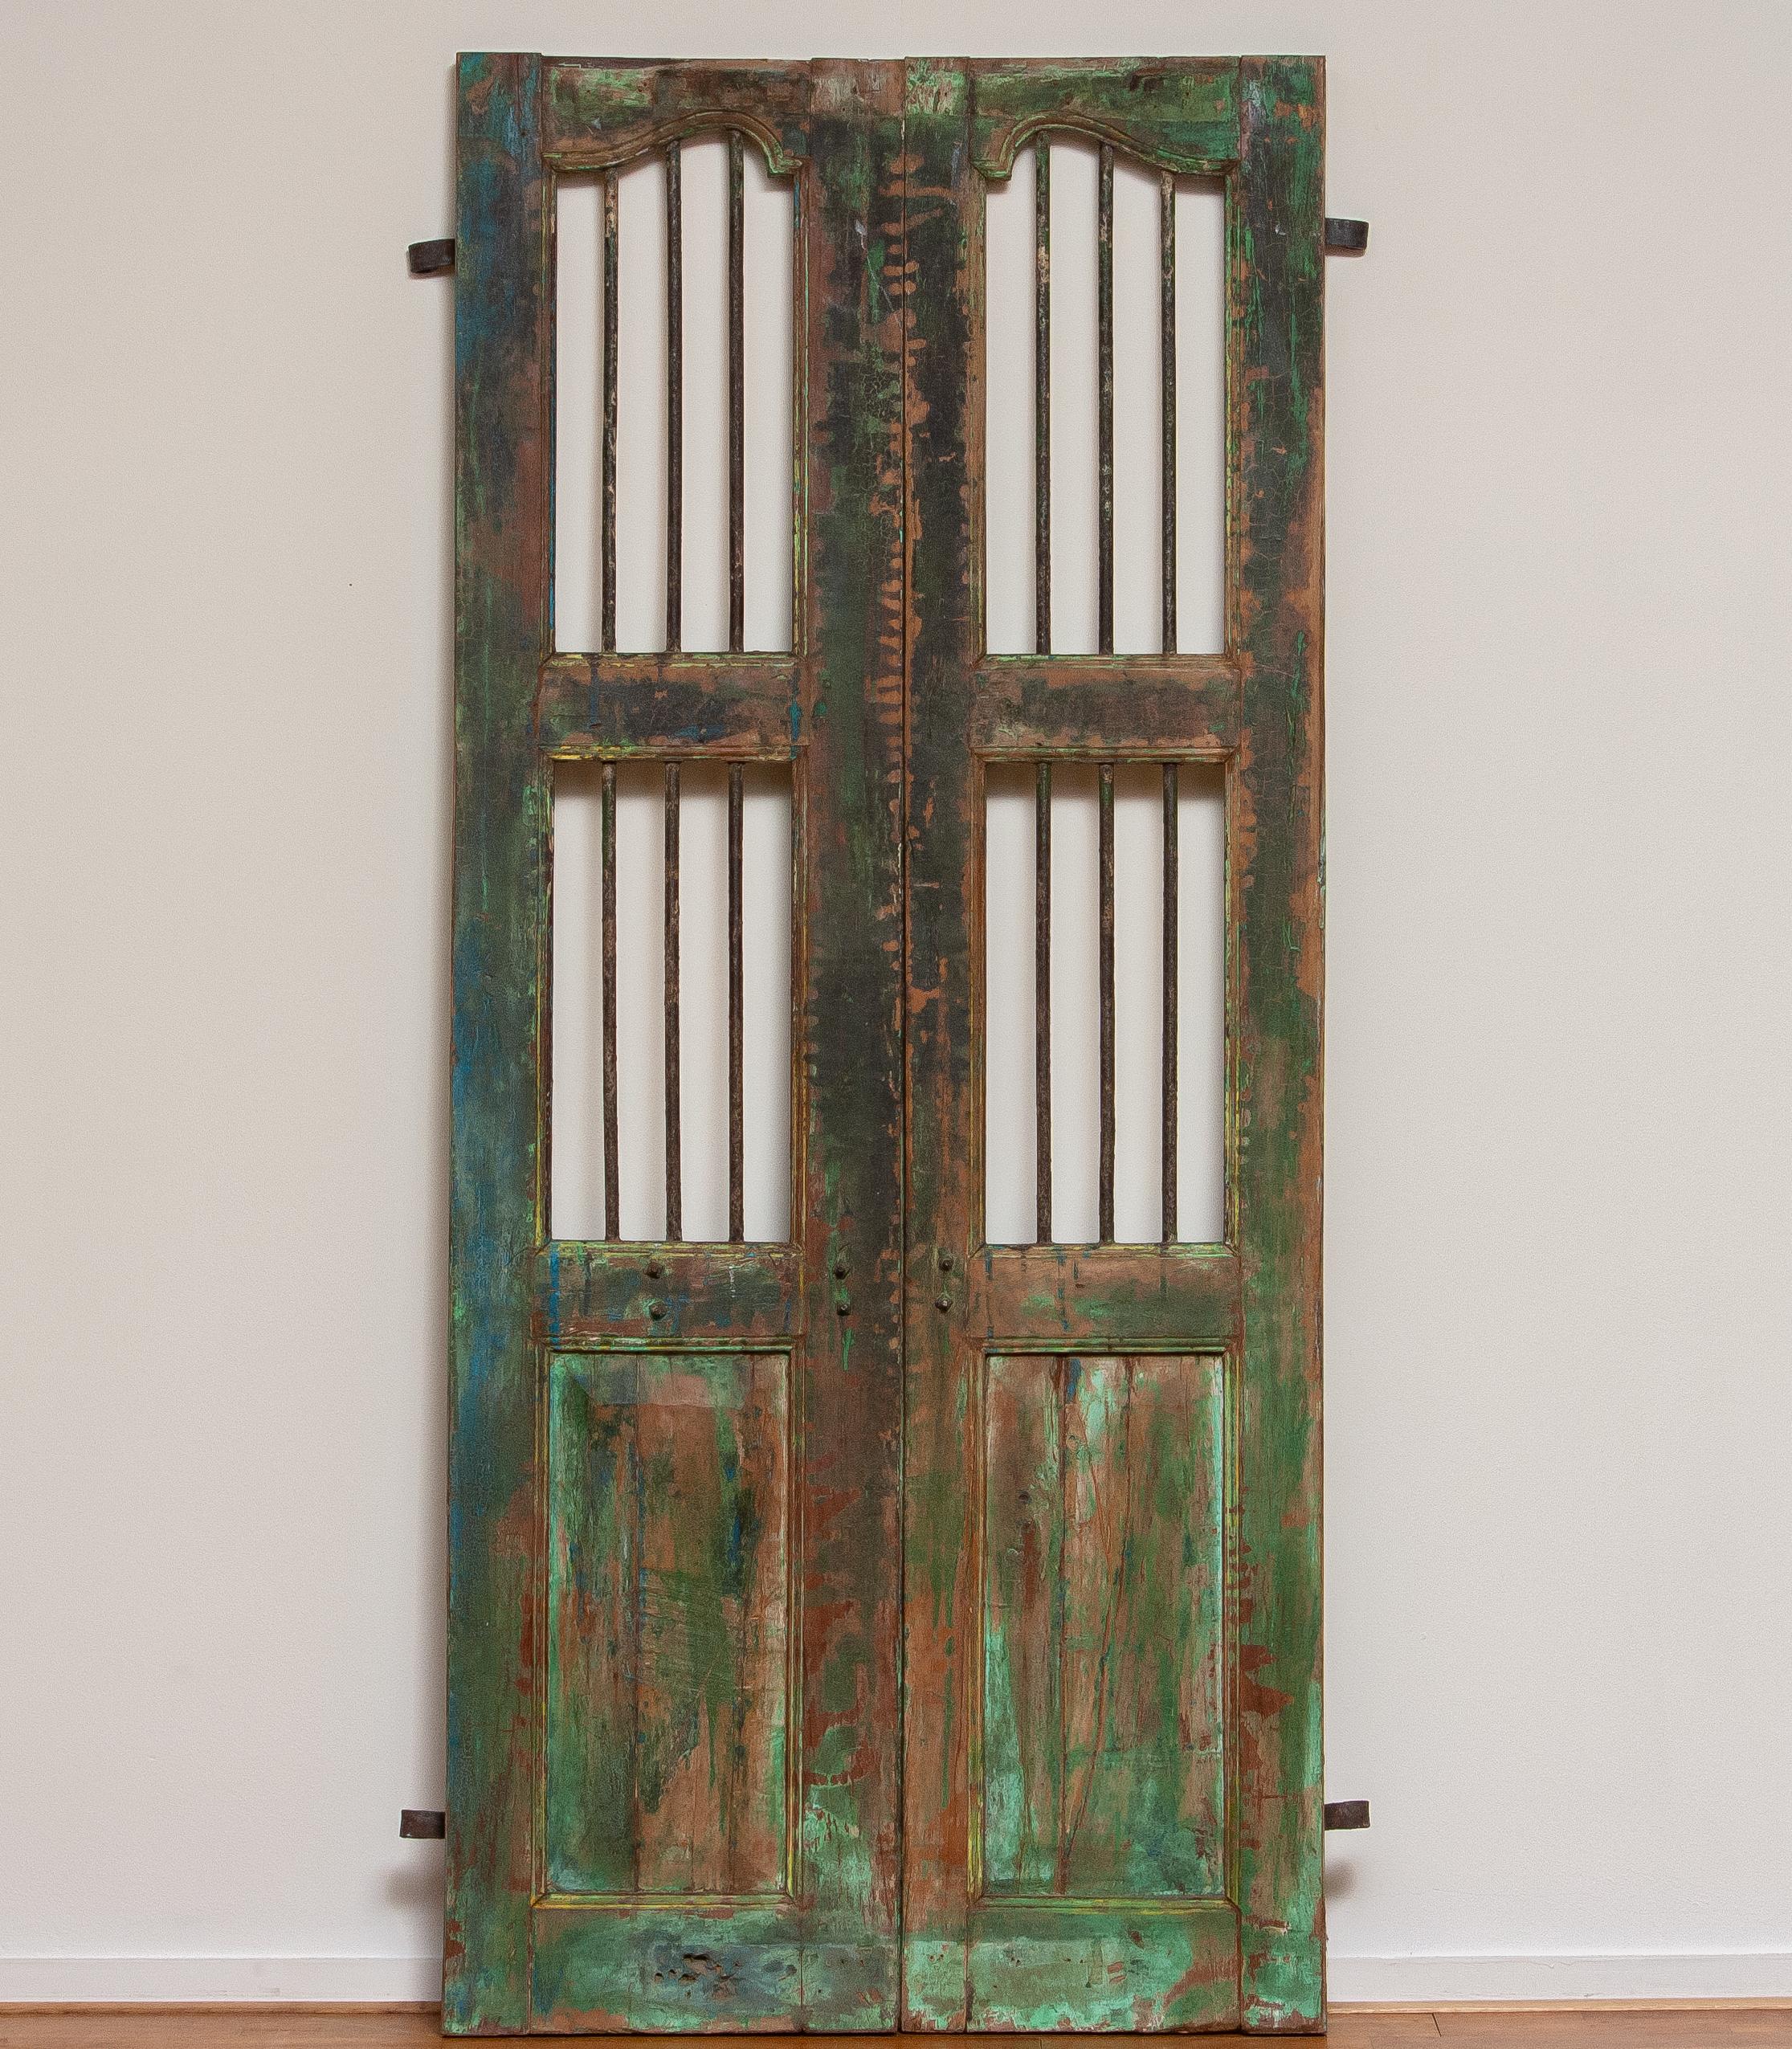 Anglo Raj 19th Century Pair of Antique Window / Doors Shutters from India with Metal Bars For Sale